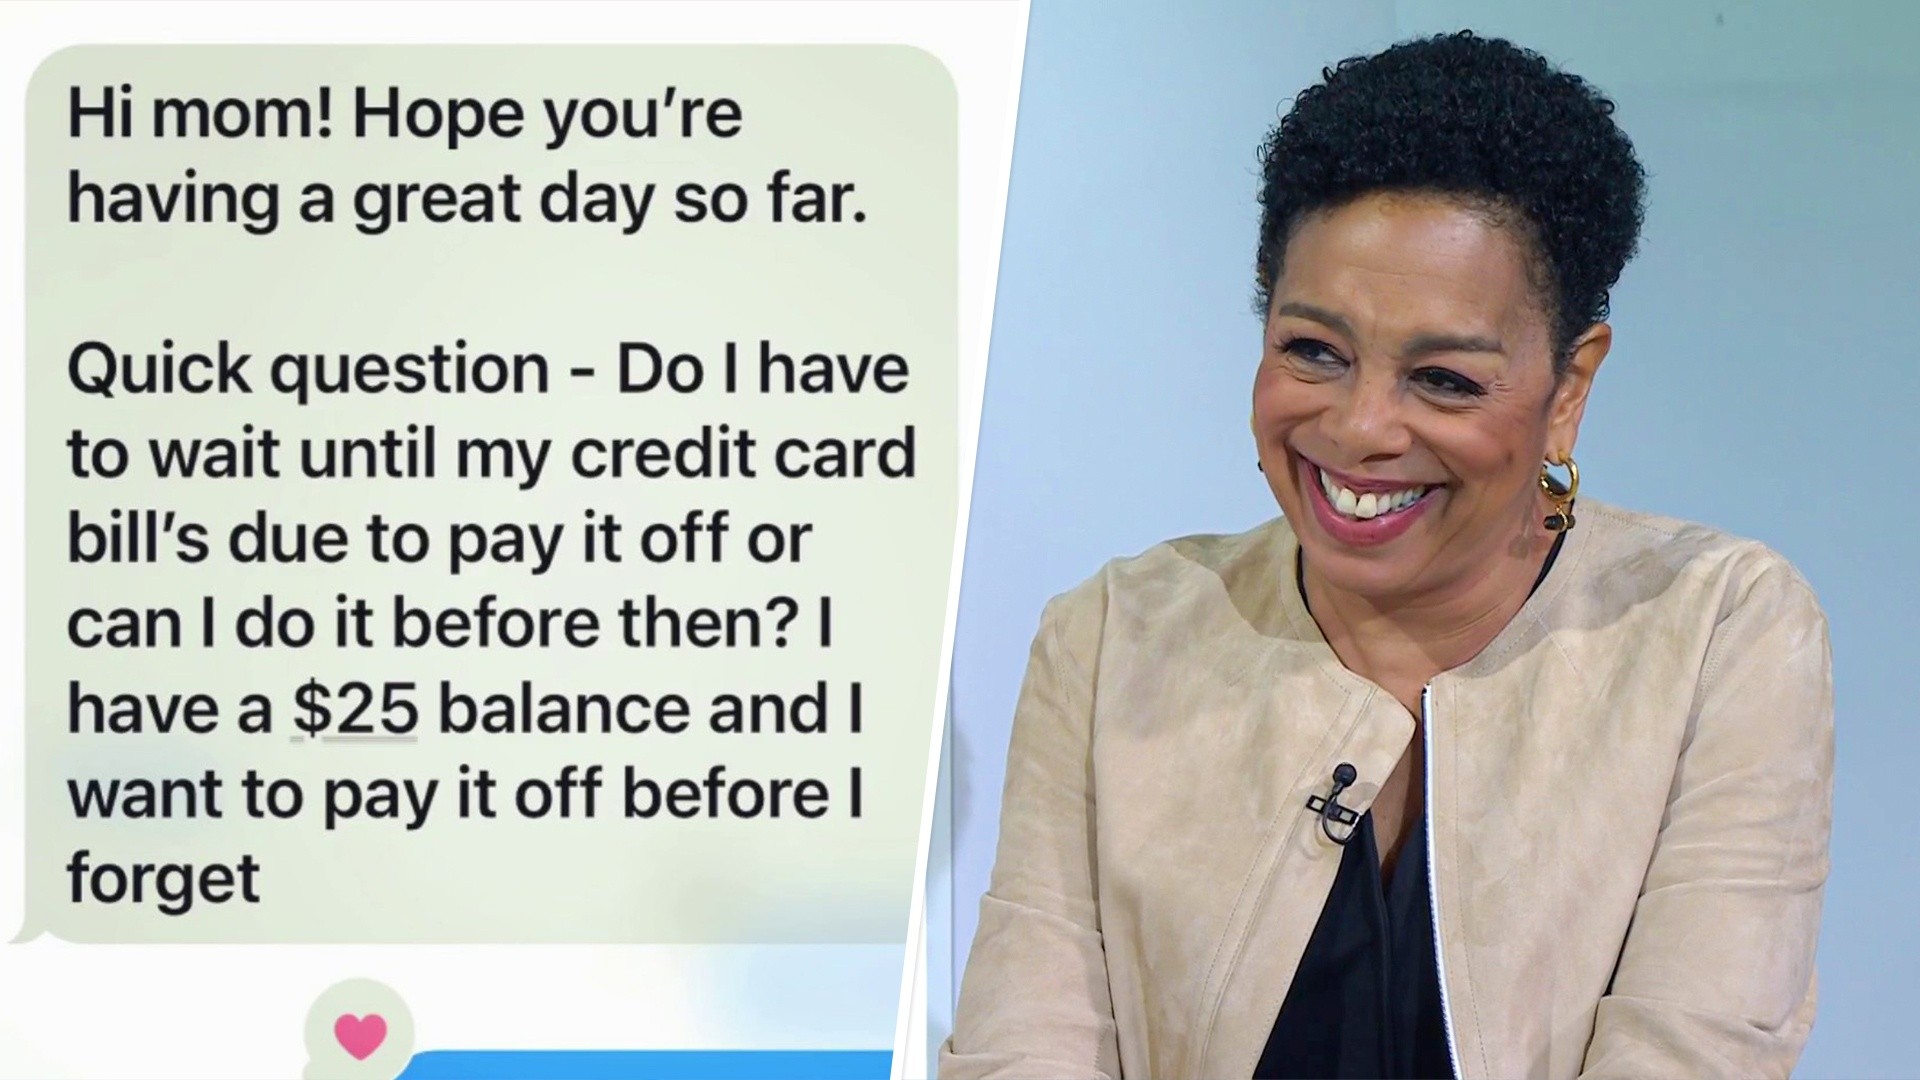 CNBC's Sharon Epperson shares text from daughter seeking financial advice